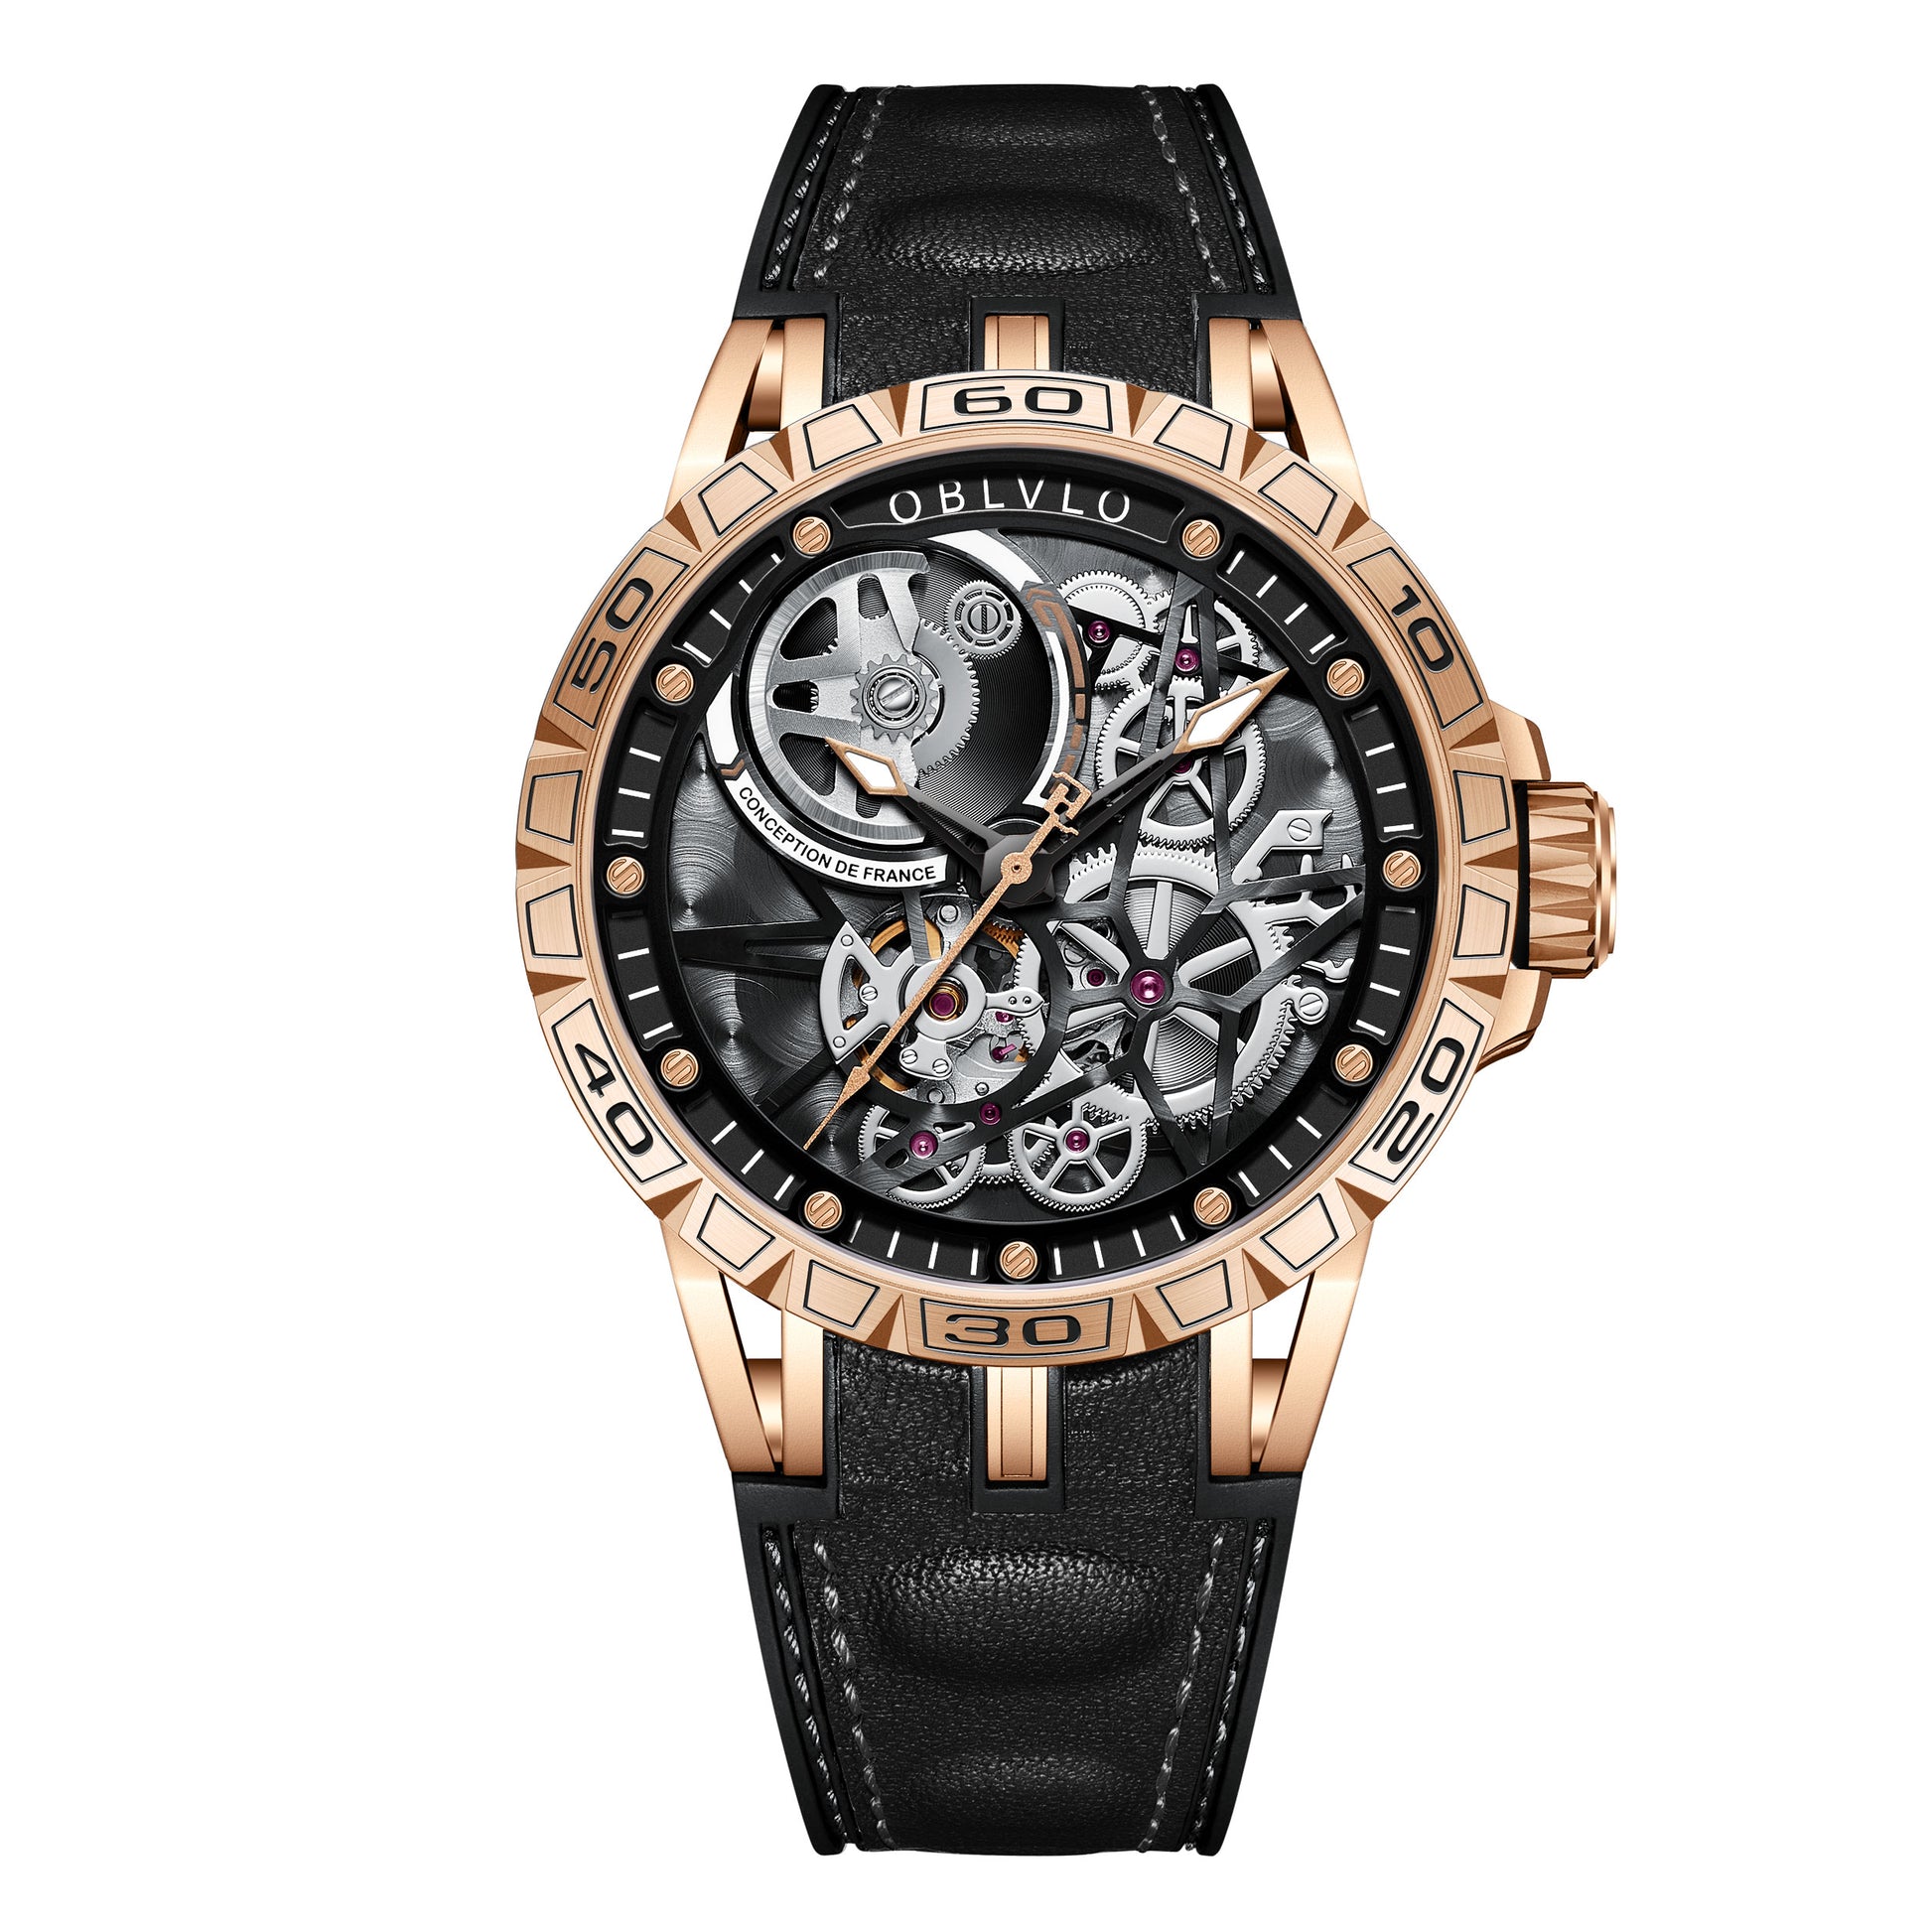 Gold Oblvlo LM Skeleton Sport, Automatic Self-Wind Mechanical Watch from fiveto.co.uk